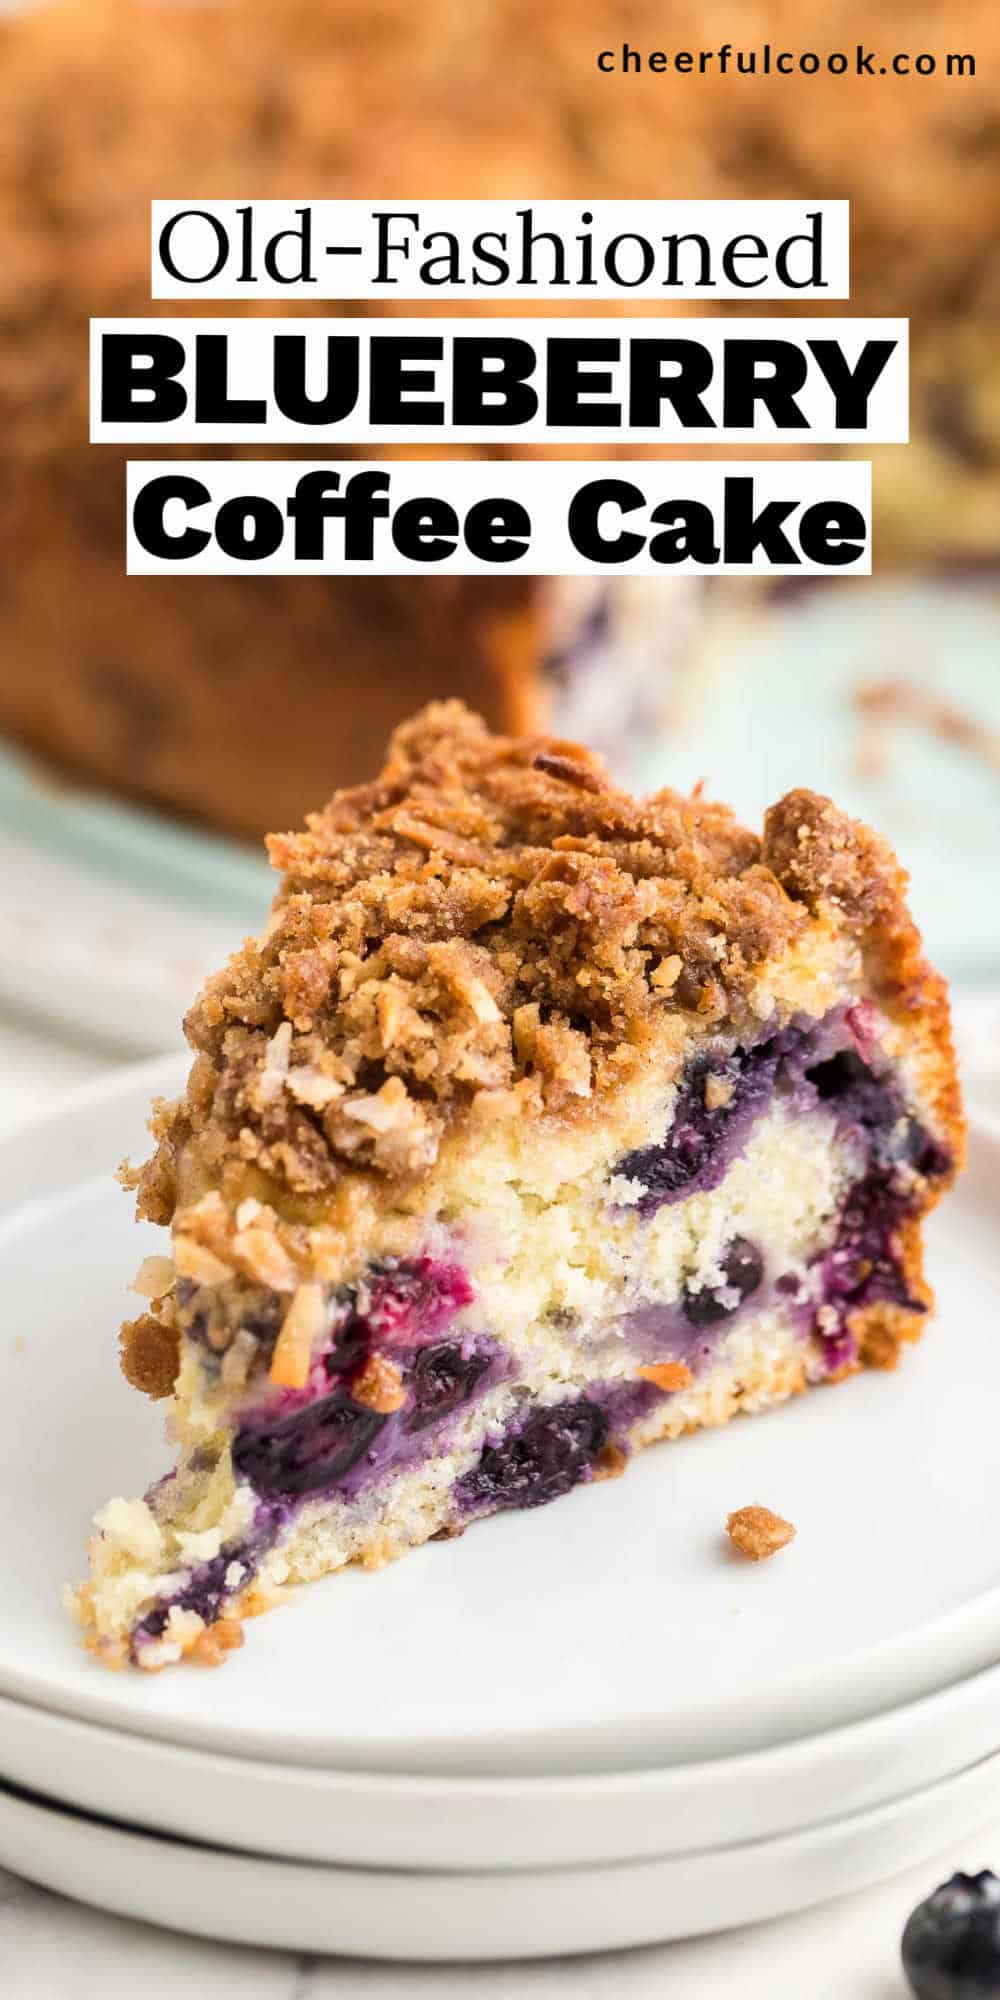 This heavenly, old-fashioned tender Blueberry Coffee Cake is loaded with fresh blueberries and topped with an insanely delicious cinnamon and coconut streusel topping. It's the kind of recipe that gets passed down from generation to generation, because it's just THAT GOOD. Easy Blueberry Coffee Cake | Blueberry Breakfast Cake #cheerfulcook #blueberrycoffeecake #blueberries #recipe #best #dessert #breakfast via @cheerfulcook